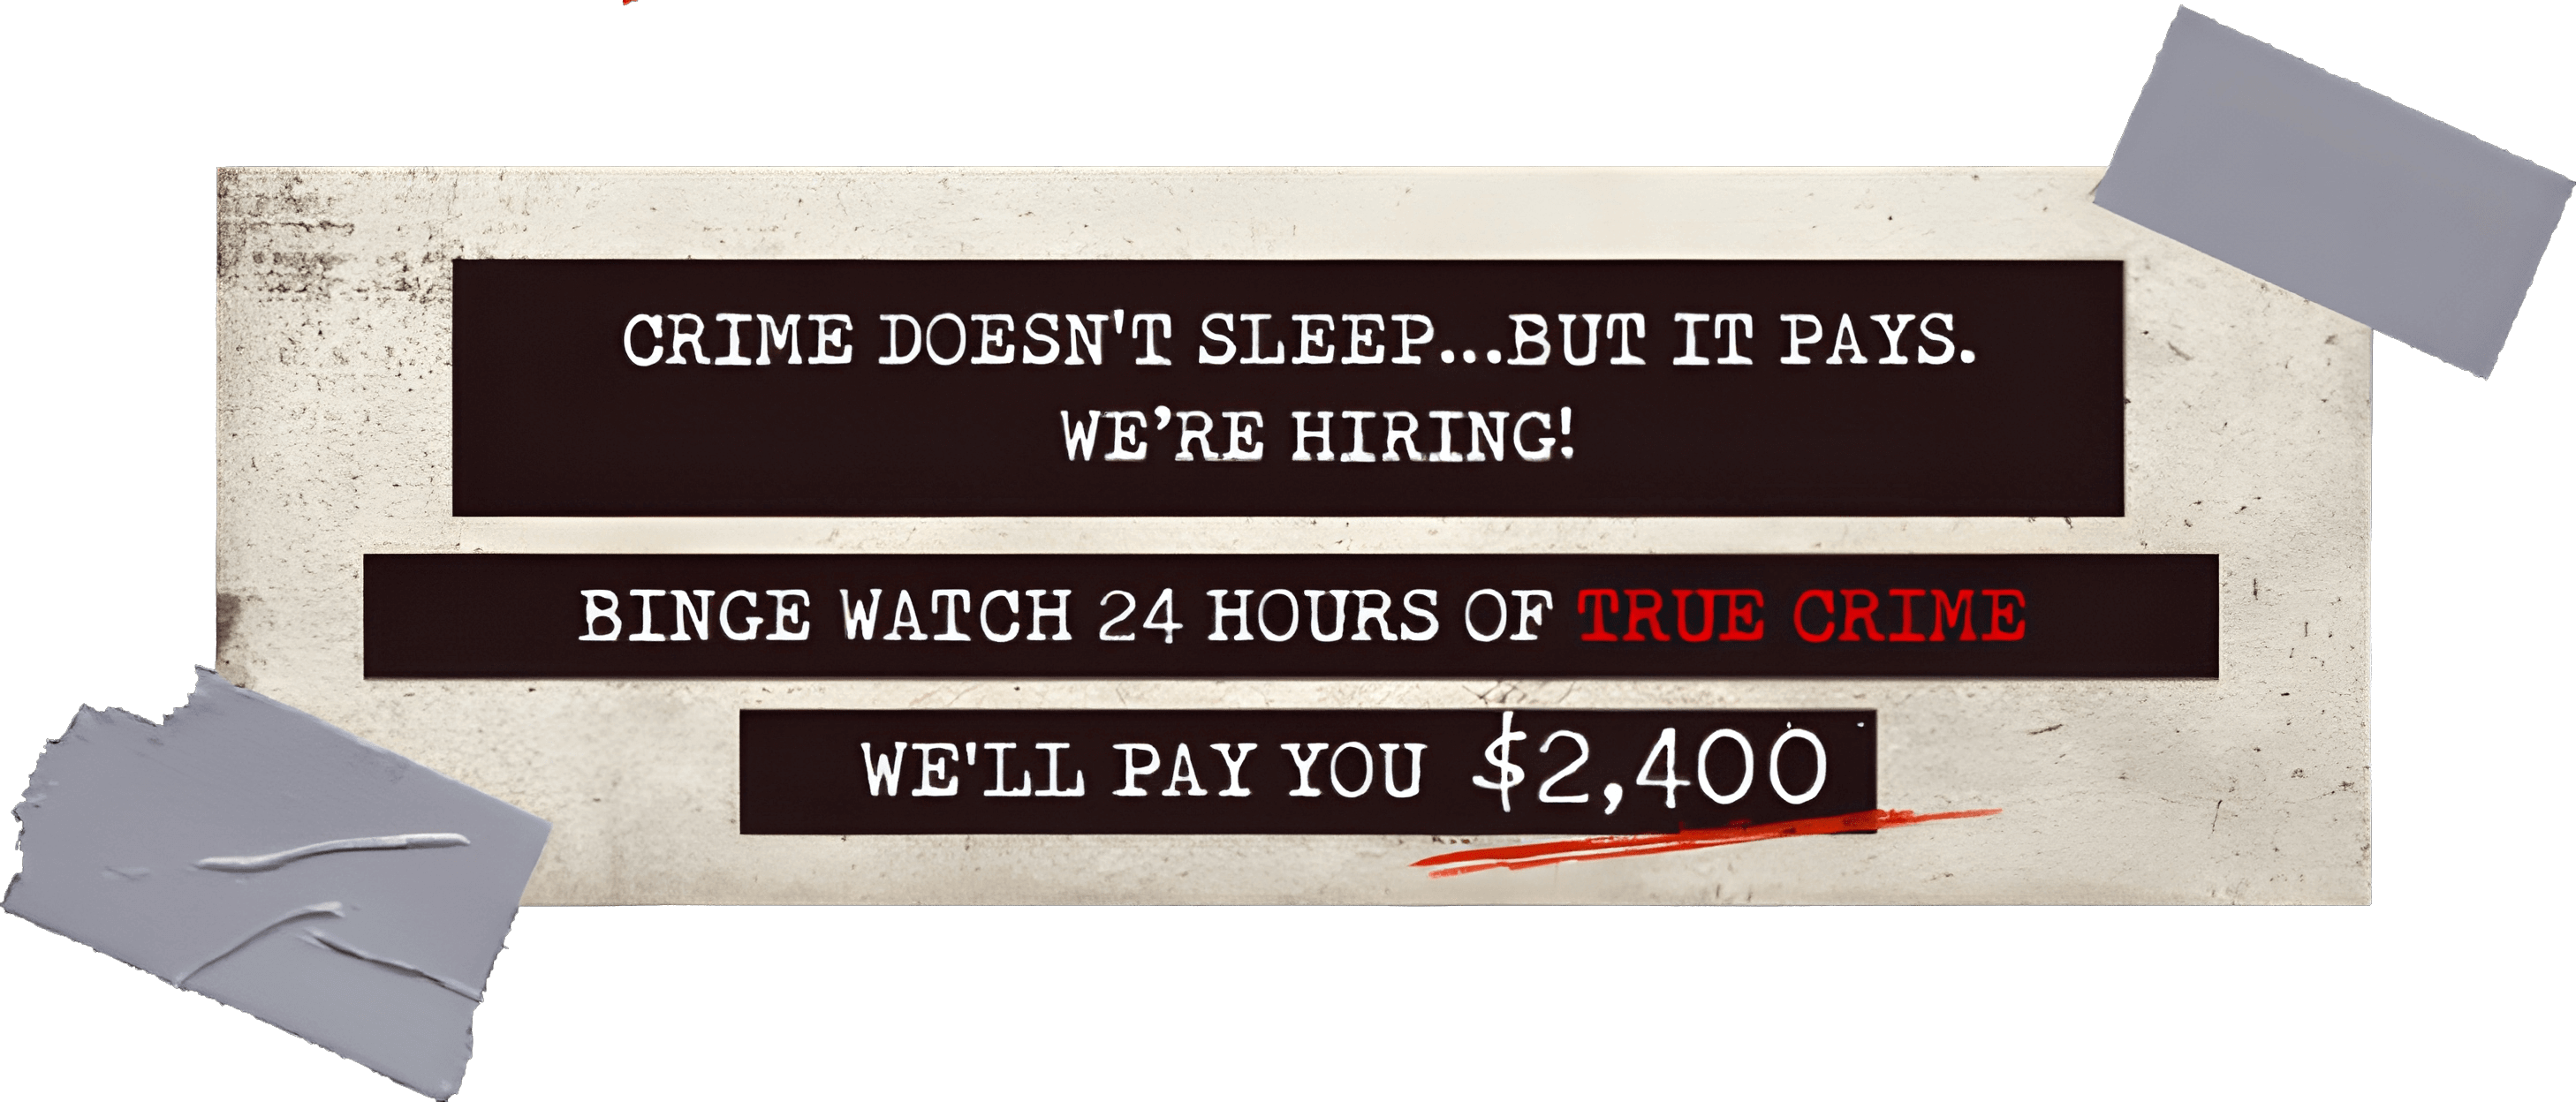 Crime doesn’t sleep...but it pays. We’re hiring! Binge Watch 24 Hours of True Crime We’ll Pay You $2400